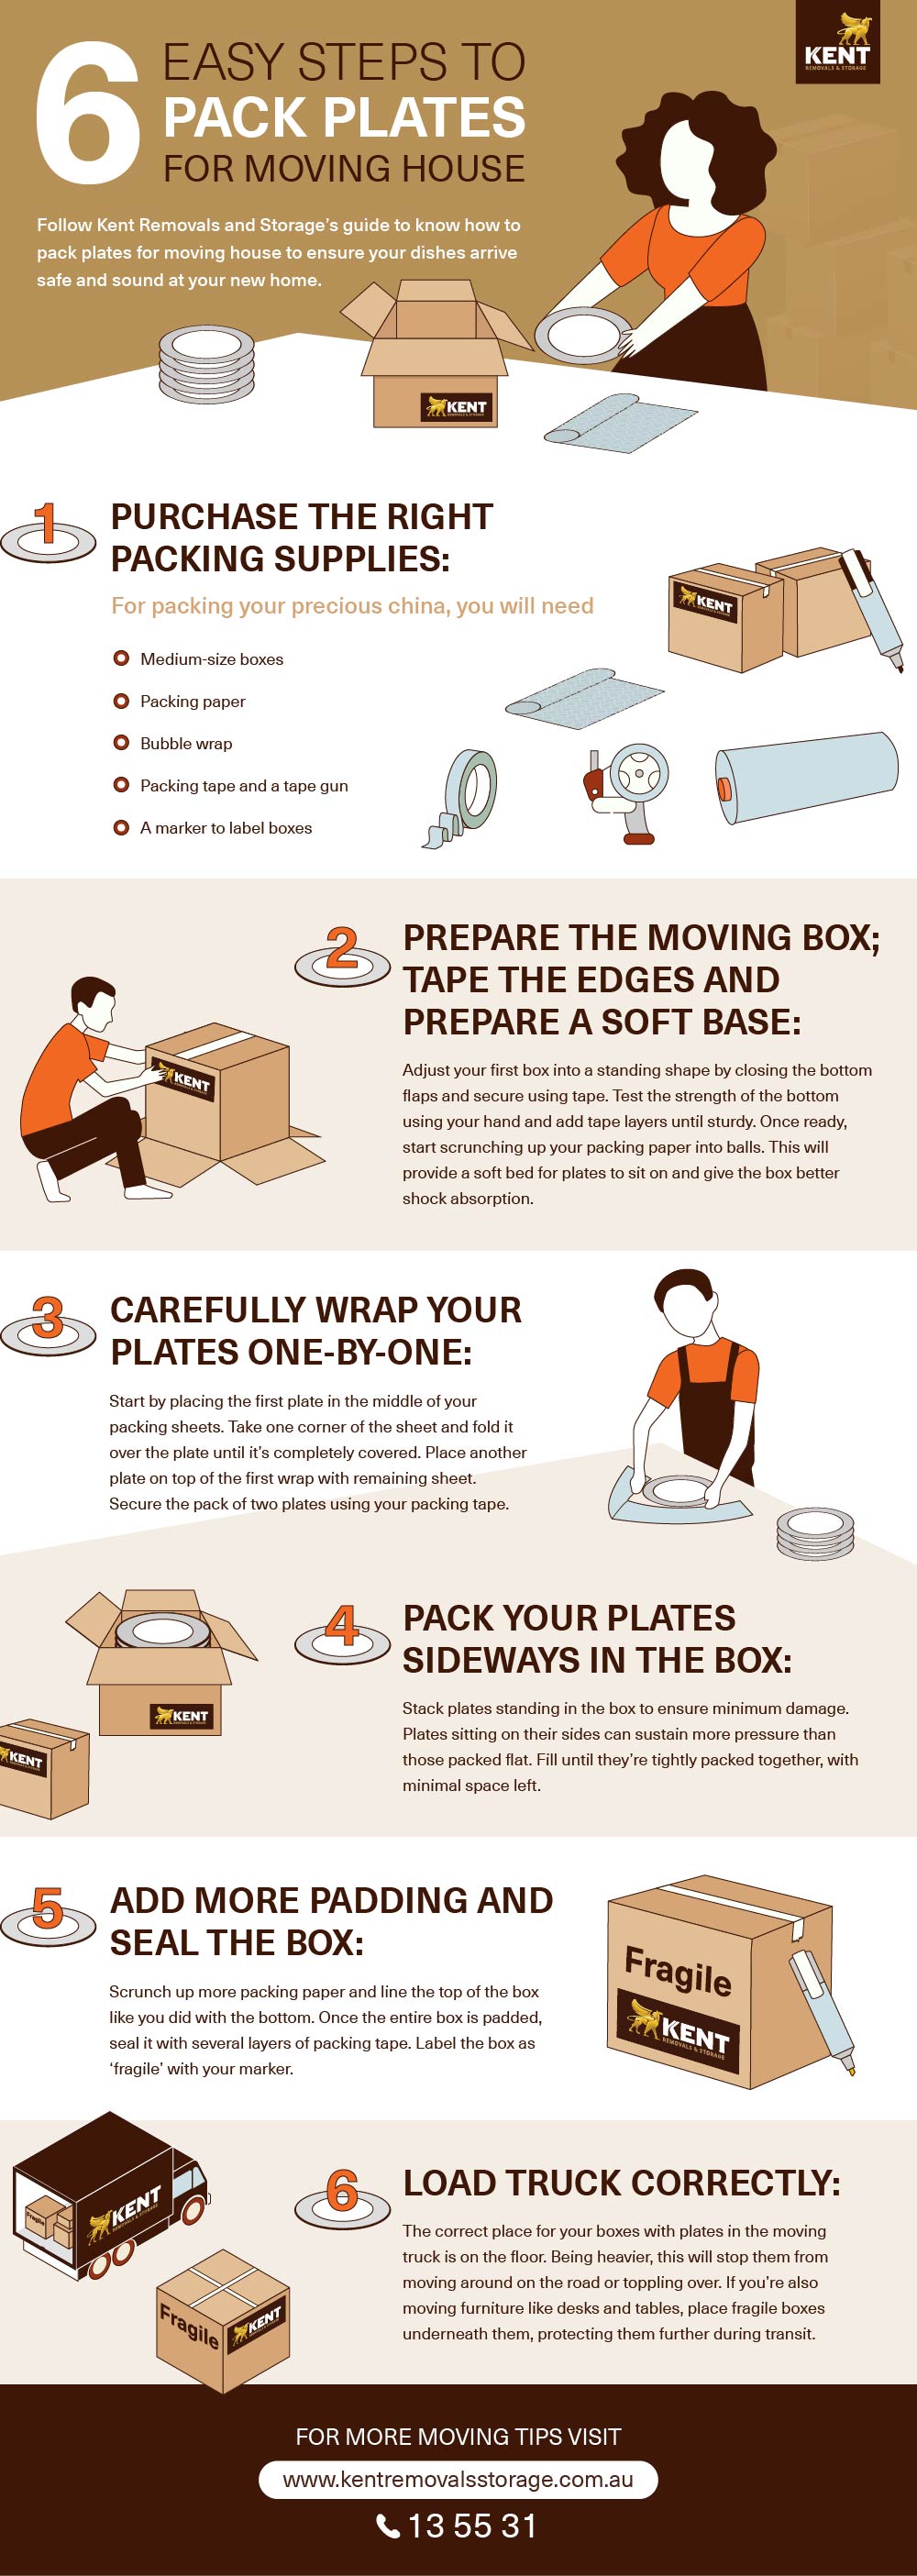 6 Easy Steps To Pack Plates for Moving House image